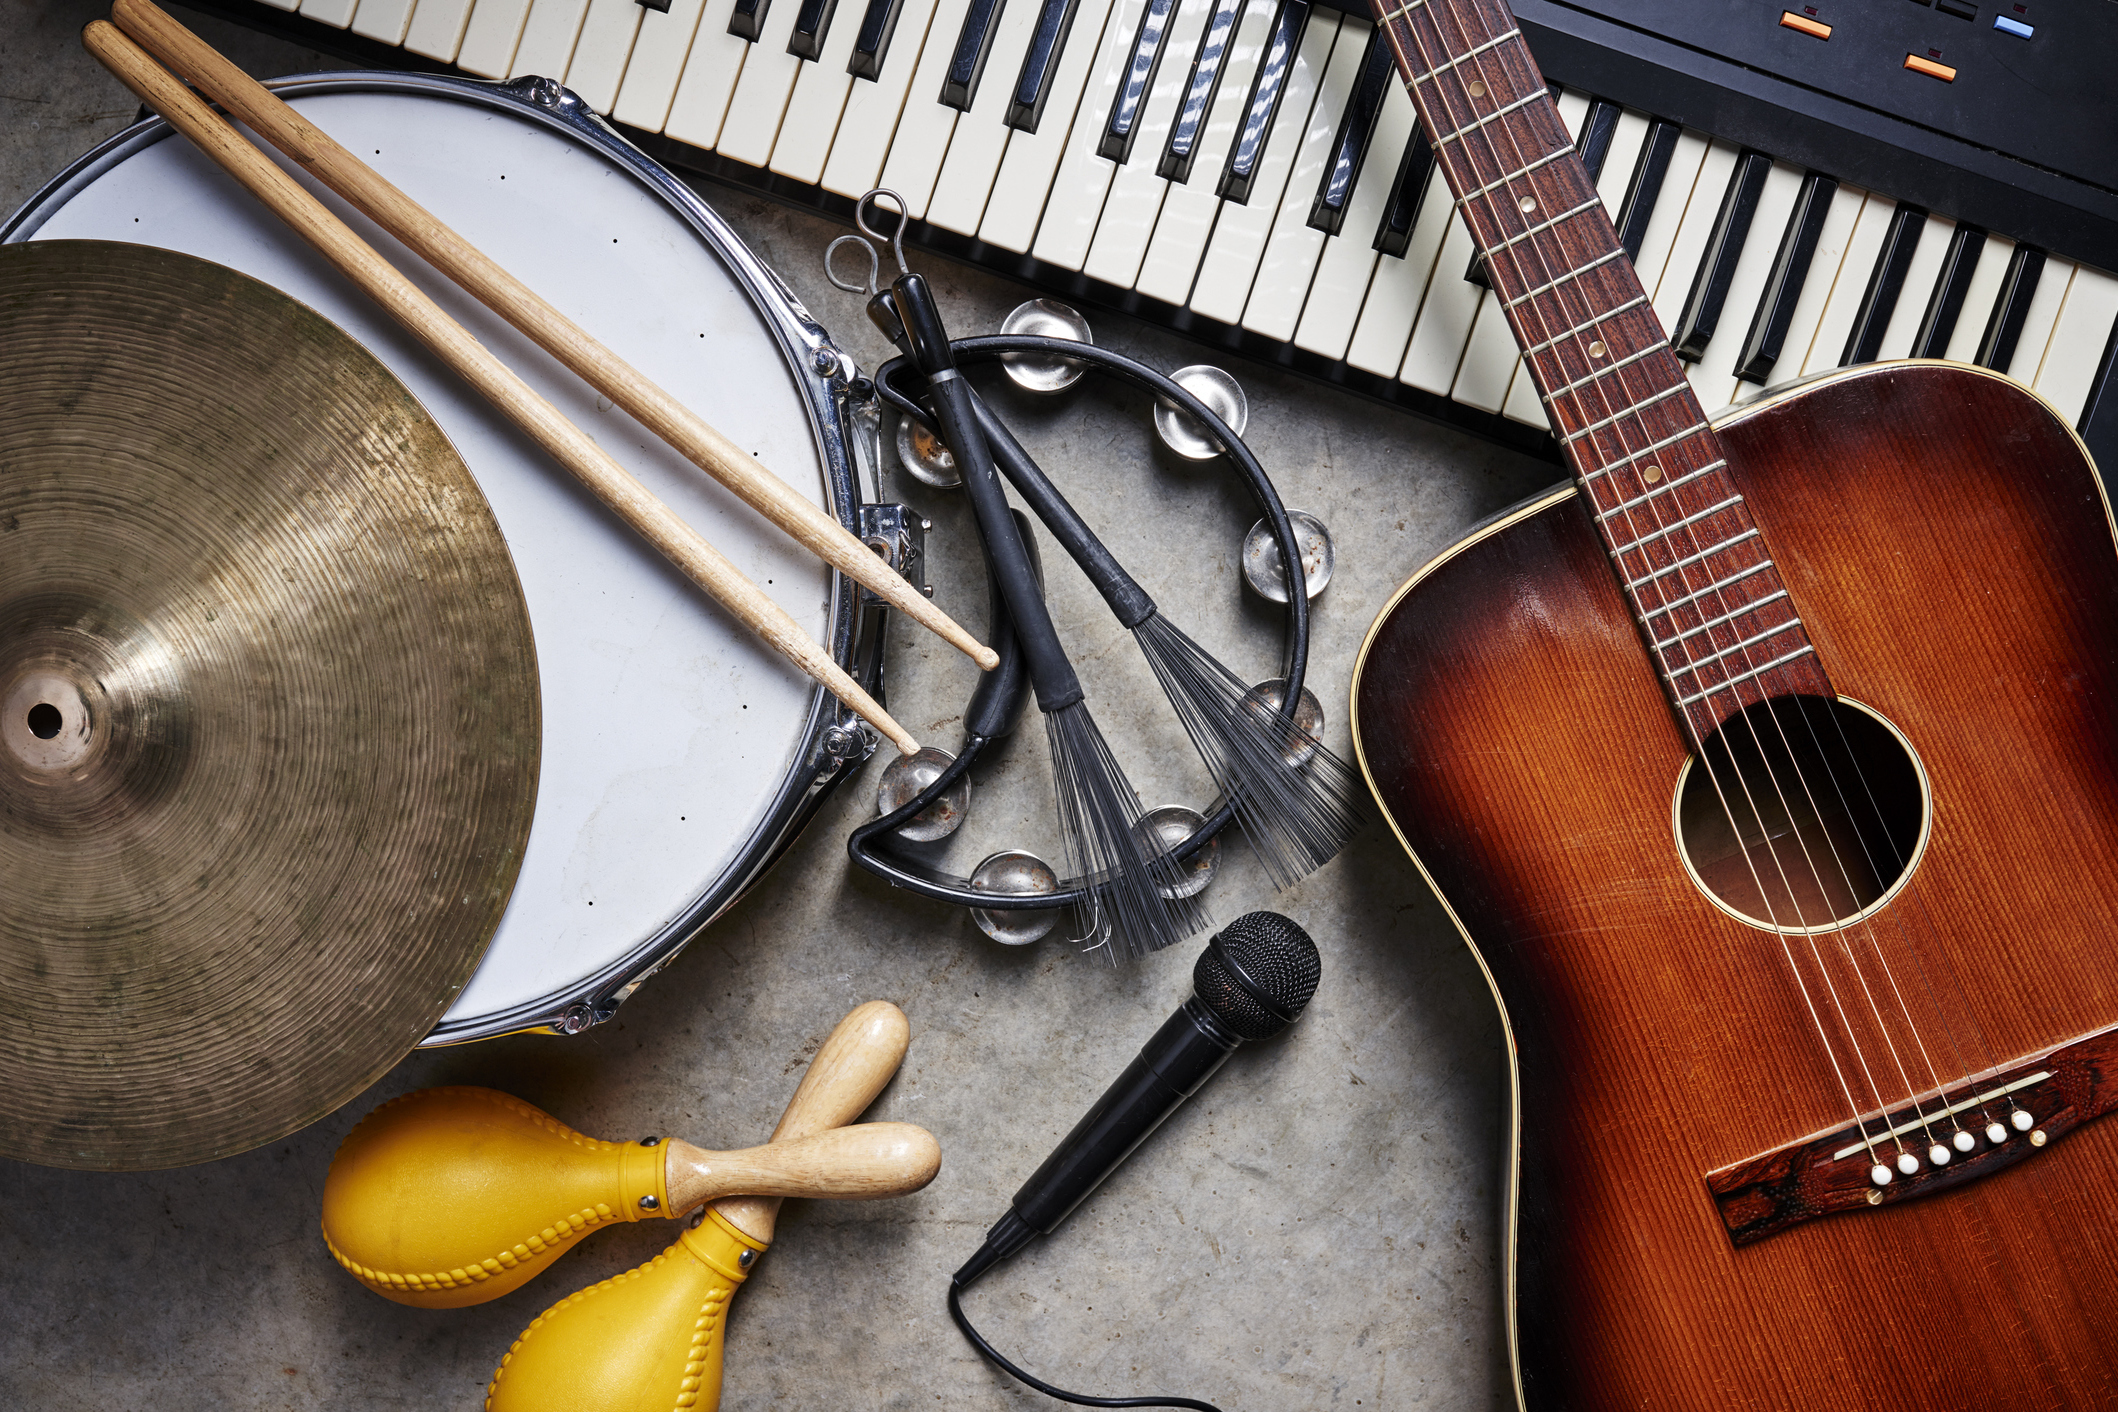 Musical instrument firms to pay millions after breaking competition law - GOV.UK